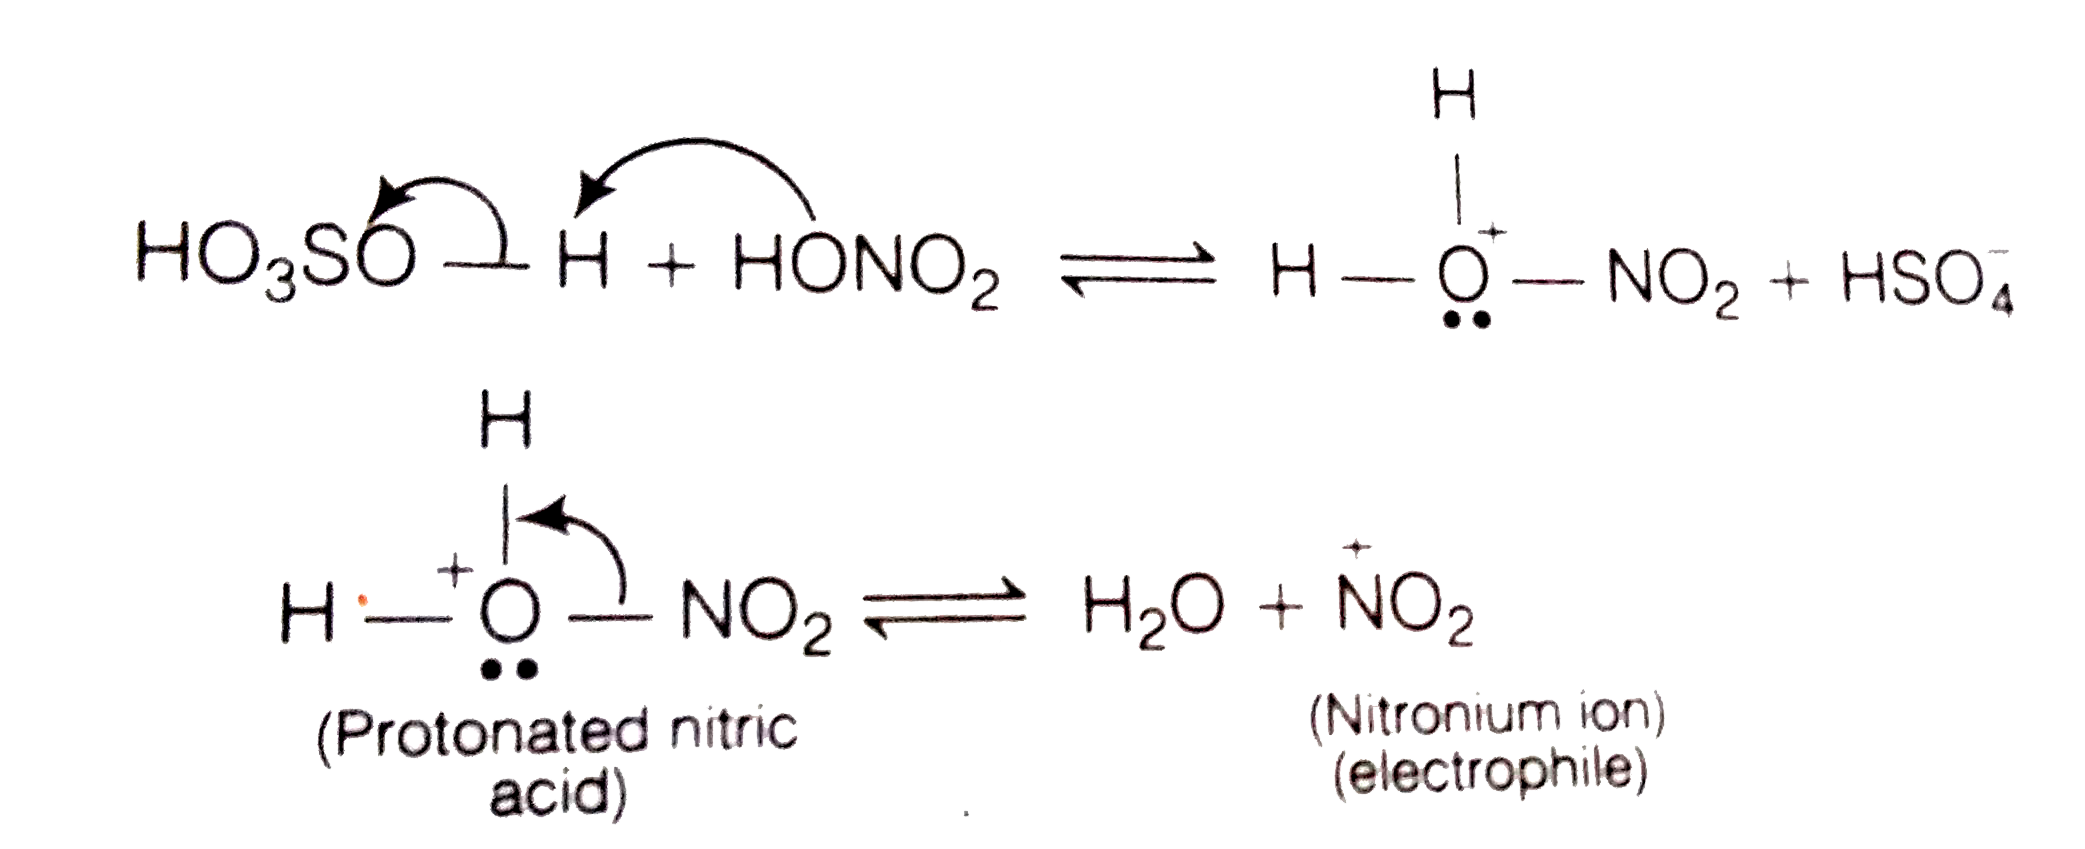 Nitration is an example of aromatic electrophilic substitution and its